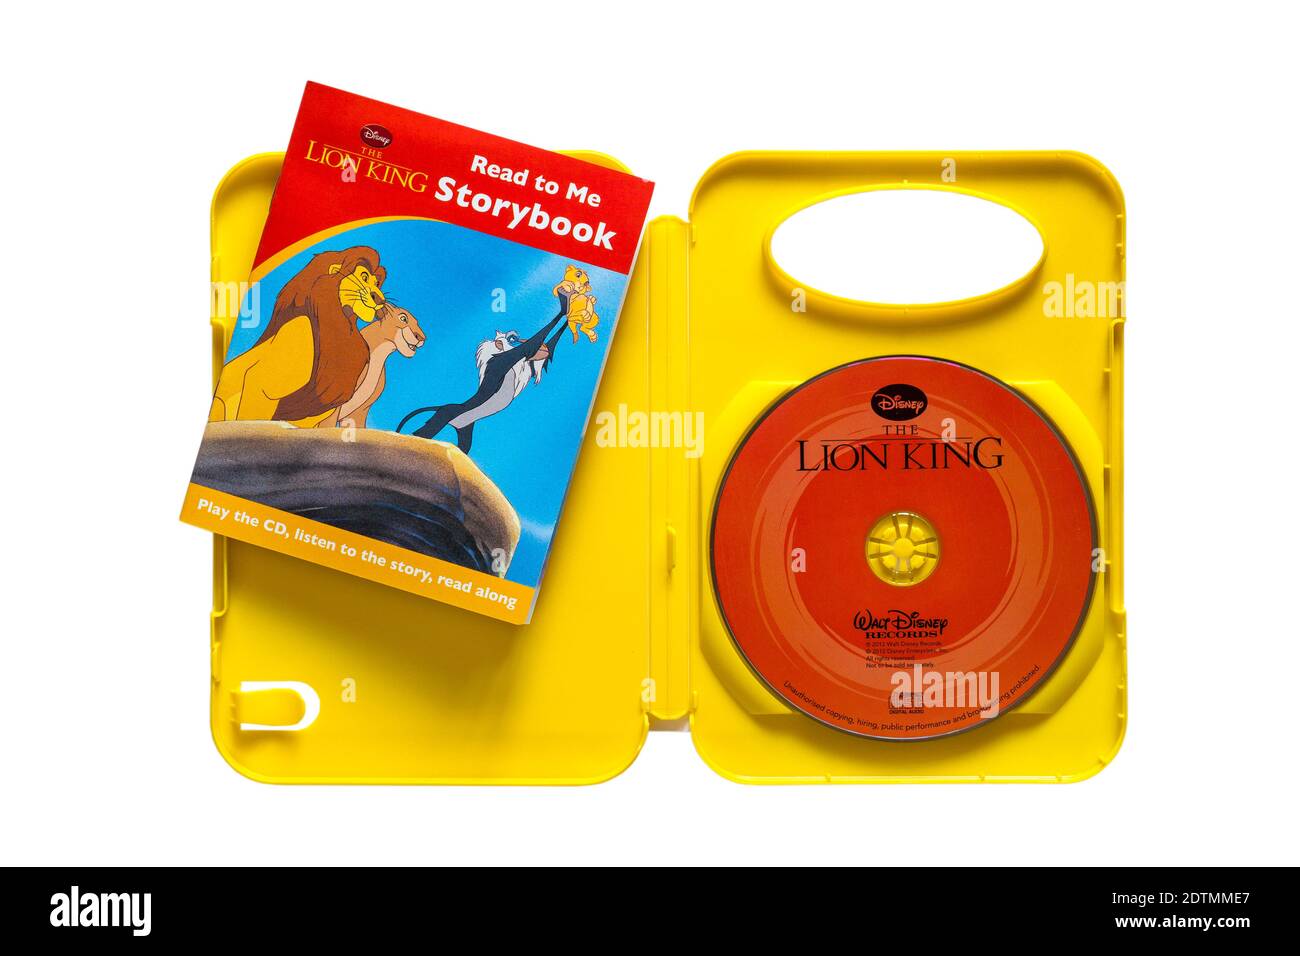 Disney Lion King Read To Me Book And Cd With Case Opened Isolated On White Background Stock Photo Alamy